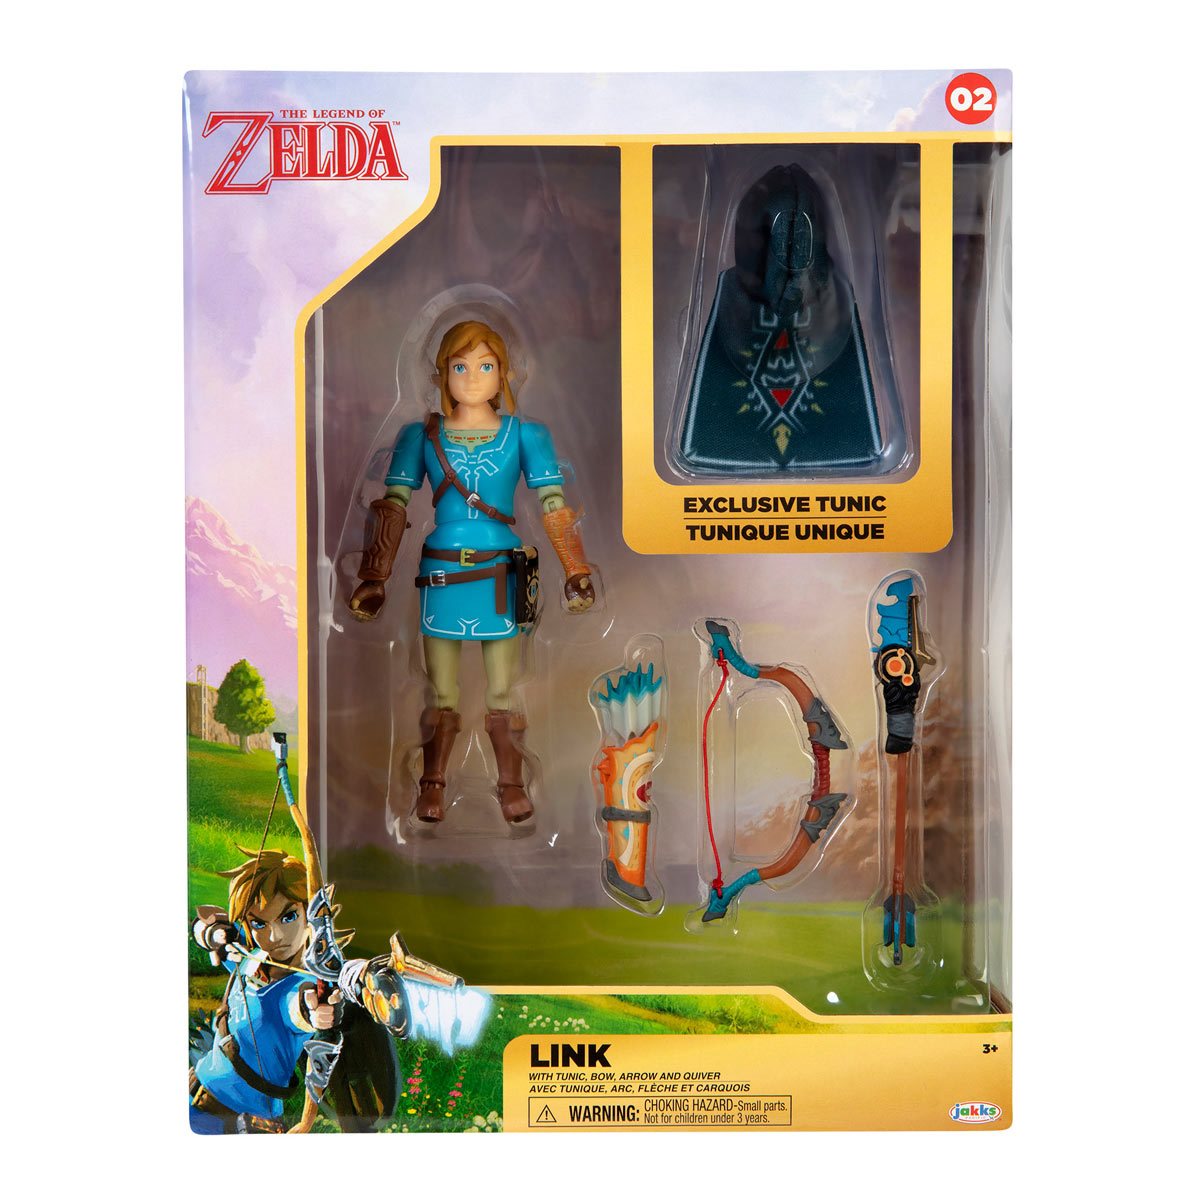 New Breath of the Wild Figures from Jakks Spotted at Walmart